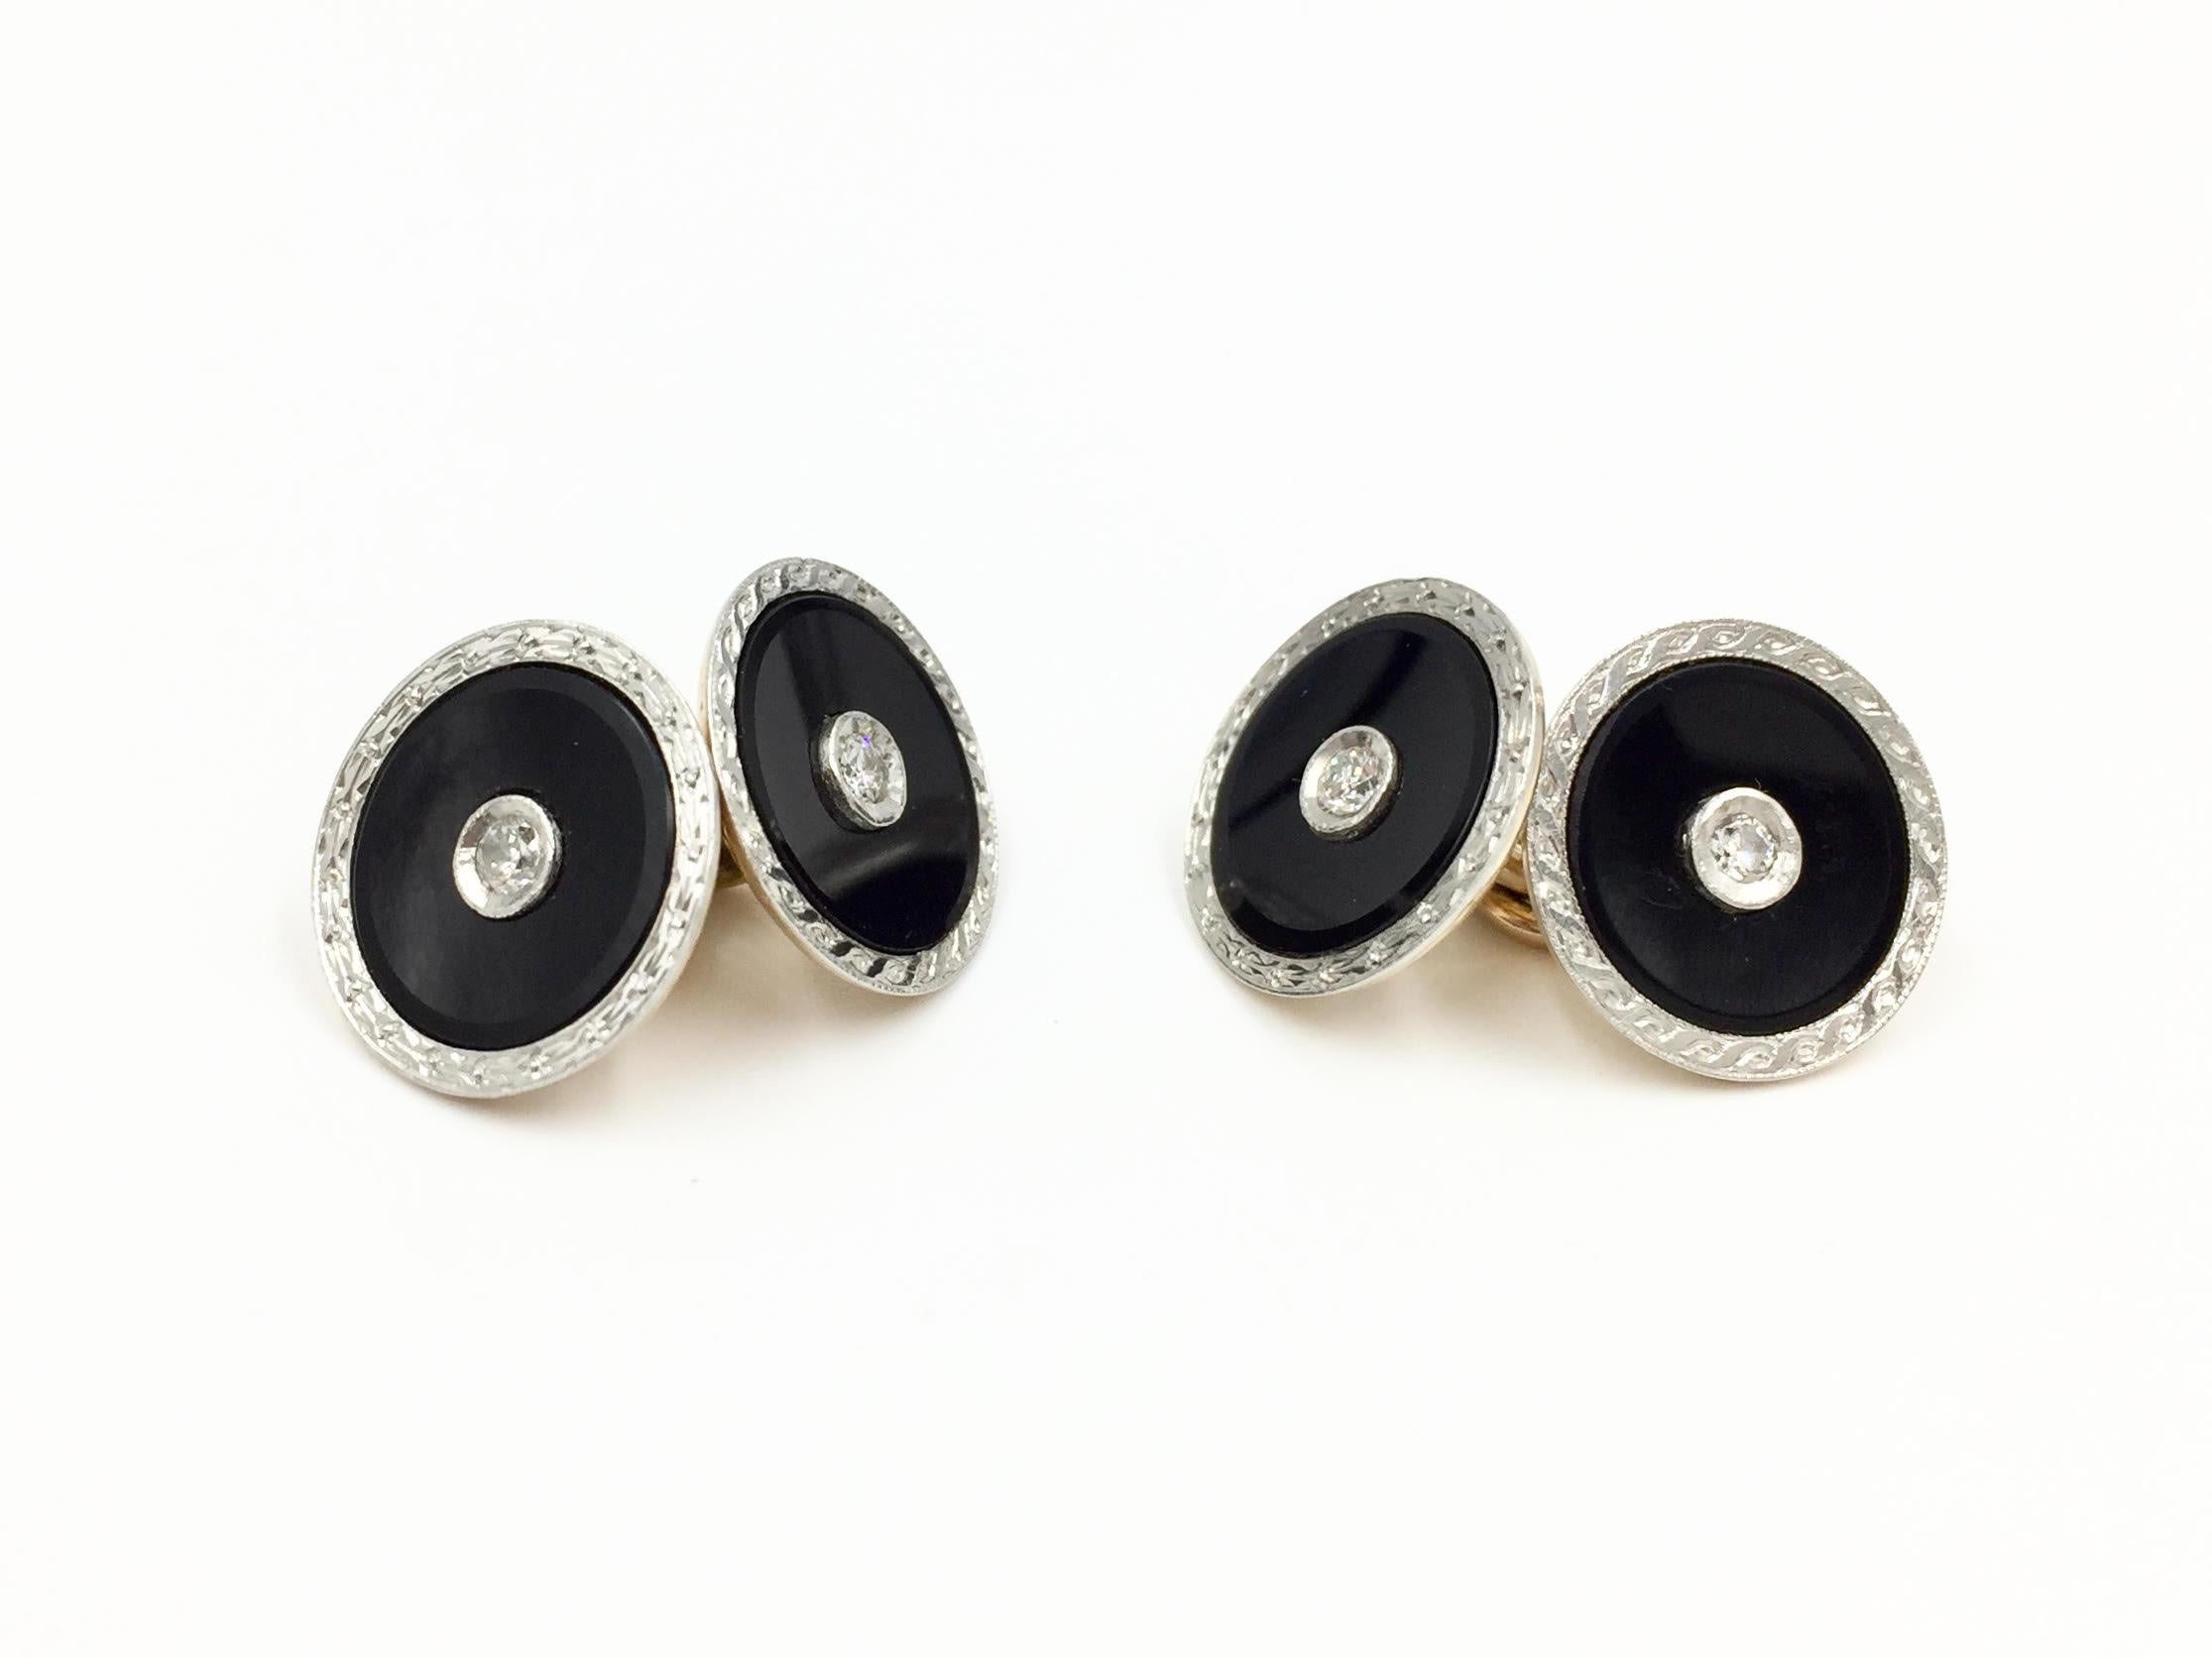 Circa 1960's in original vintage box. Well-made engraved platinum and 14 karat yellow gold onyx and diamond round cuff links with two sizes of matching shirt stud sets. Discs on cuff links have a diameter of 14mm with an approximate .07 carat round